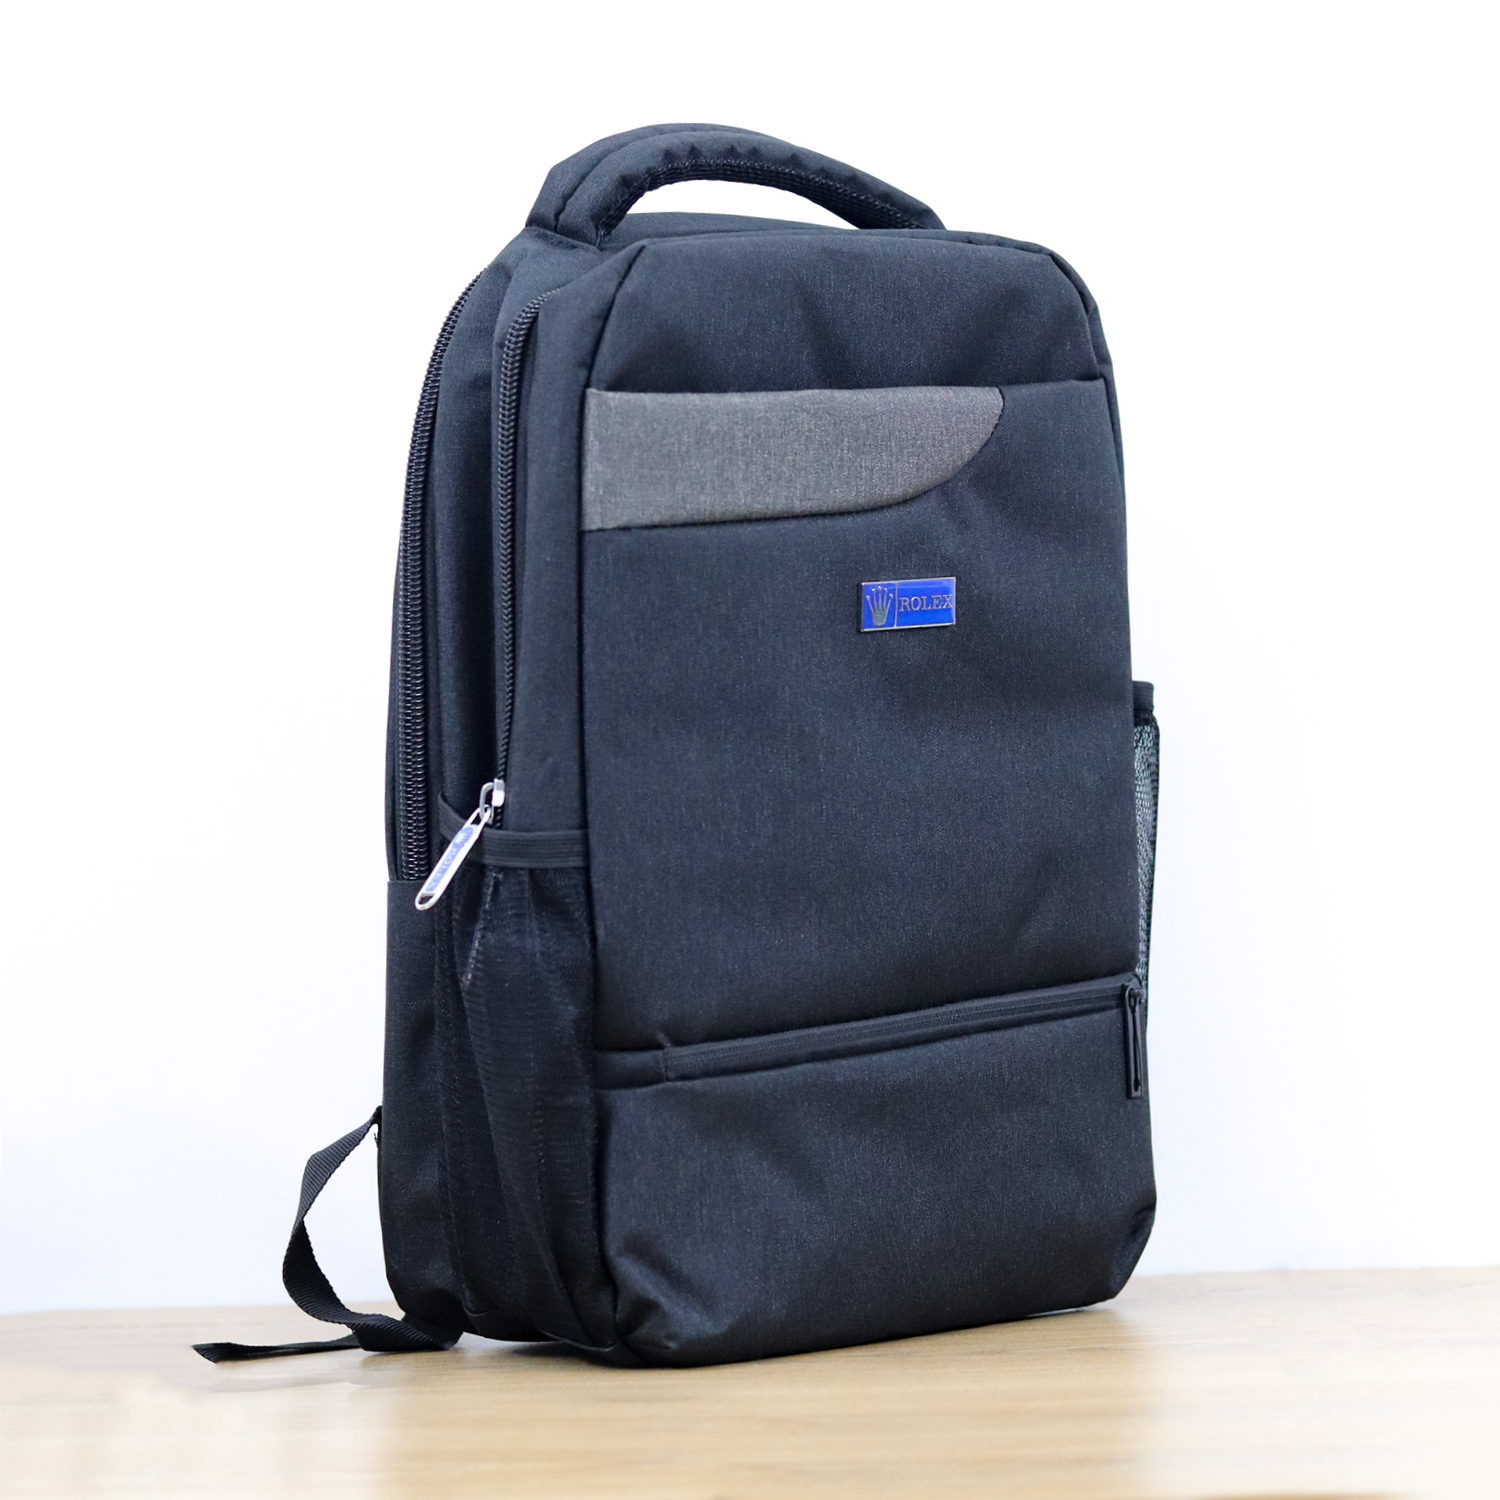 Compact Travel Backpack for Men